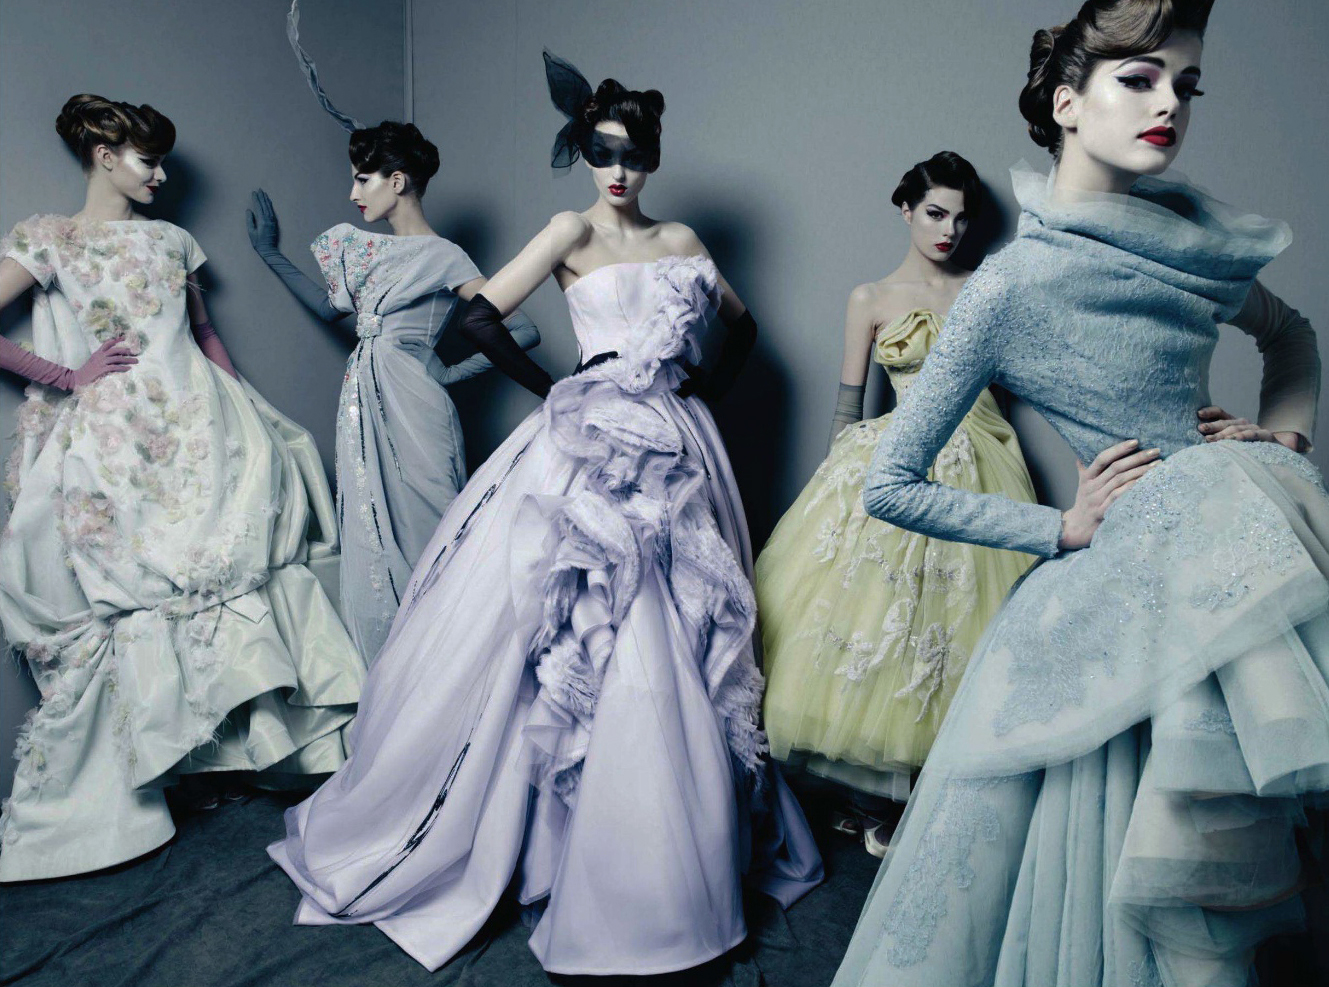 Christian Dior Haute Couture by John Galliano, 2011, photo by Patrick  Demarchelier